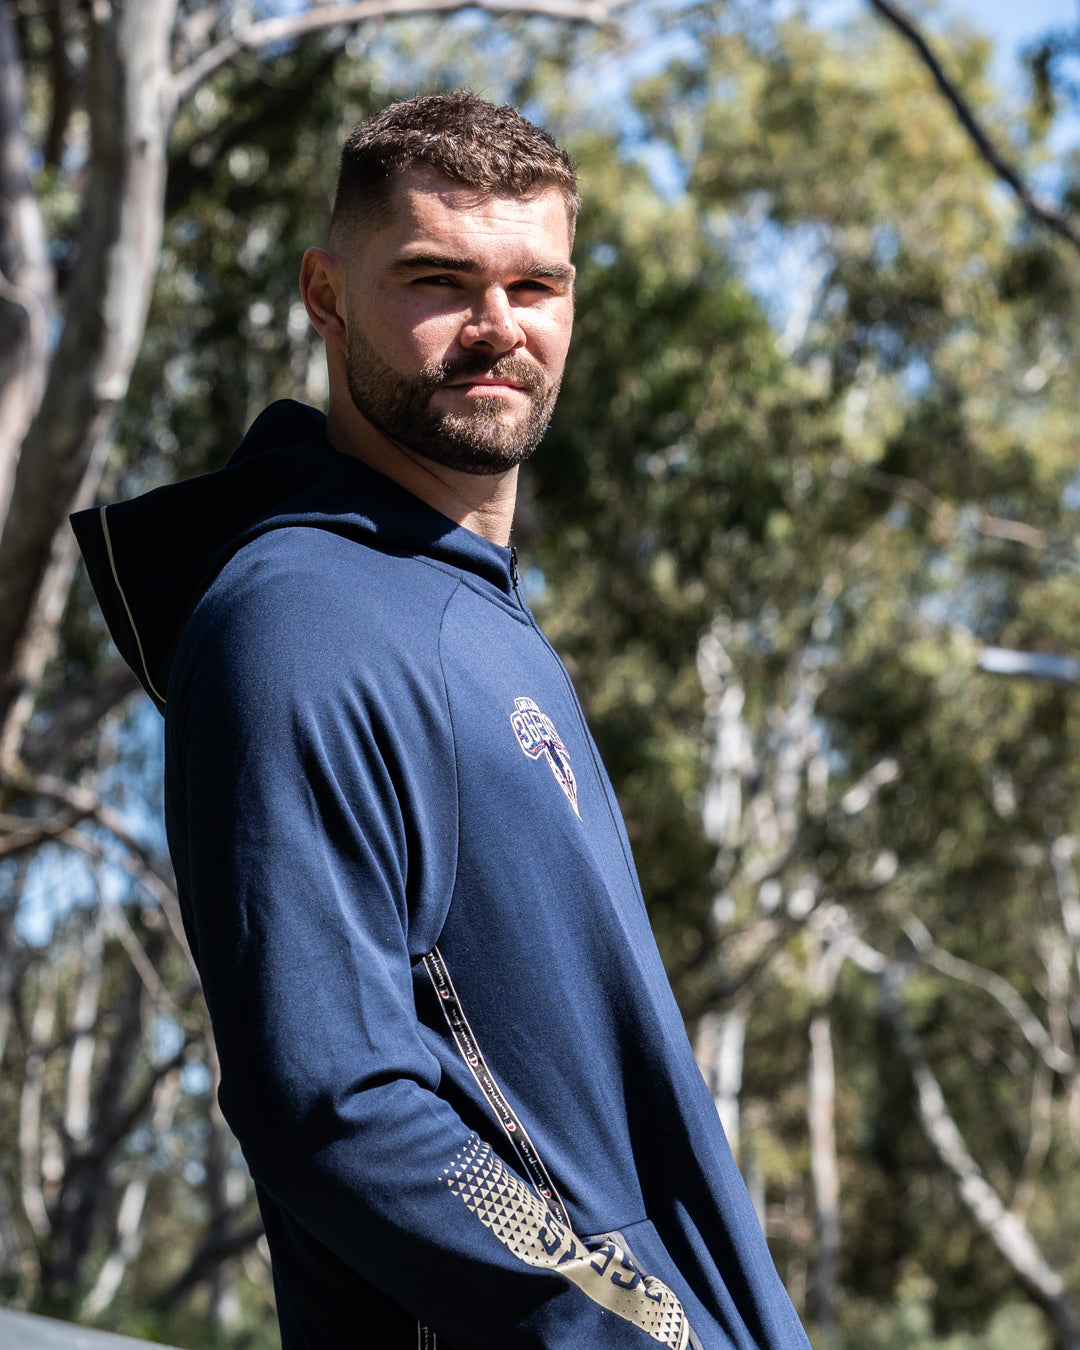 Adelaide 36ers Champion Player Official Performance Zip Hoodie - Adelaide 36ers